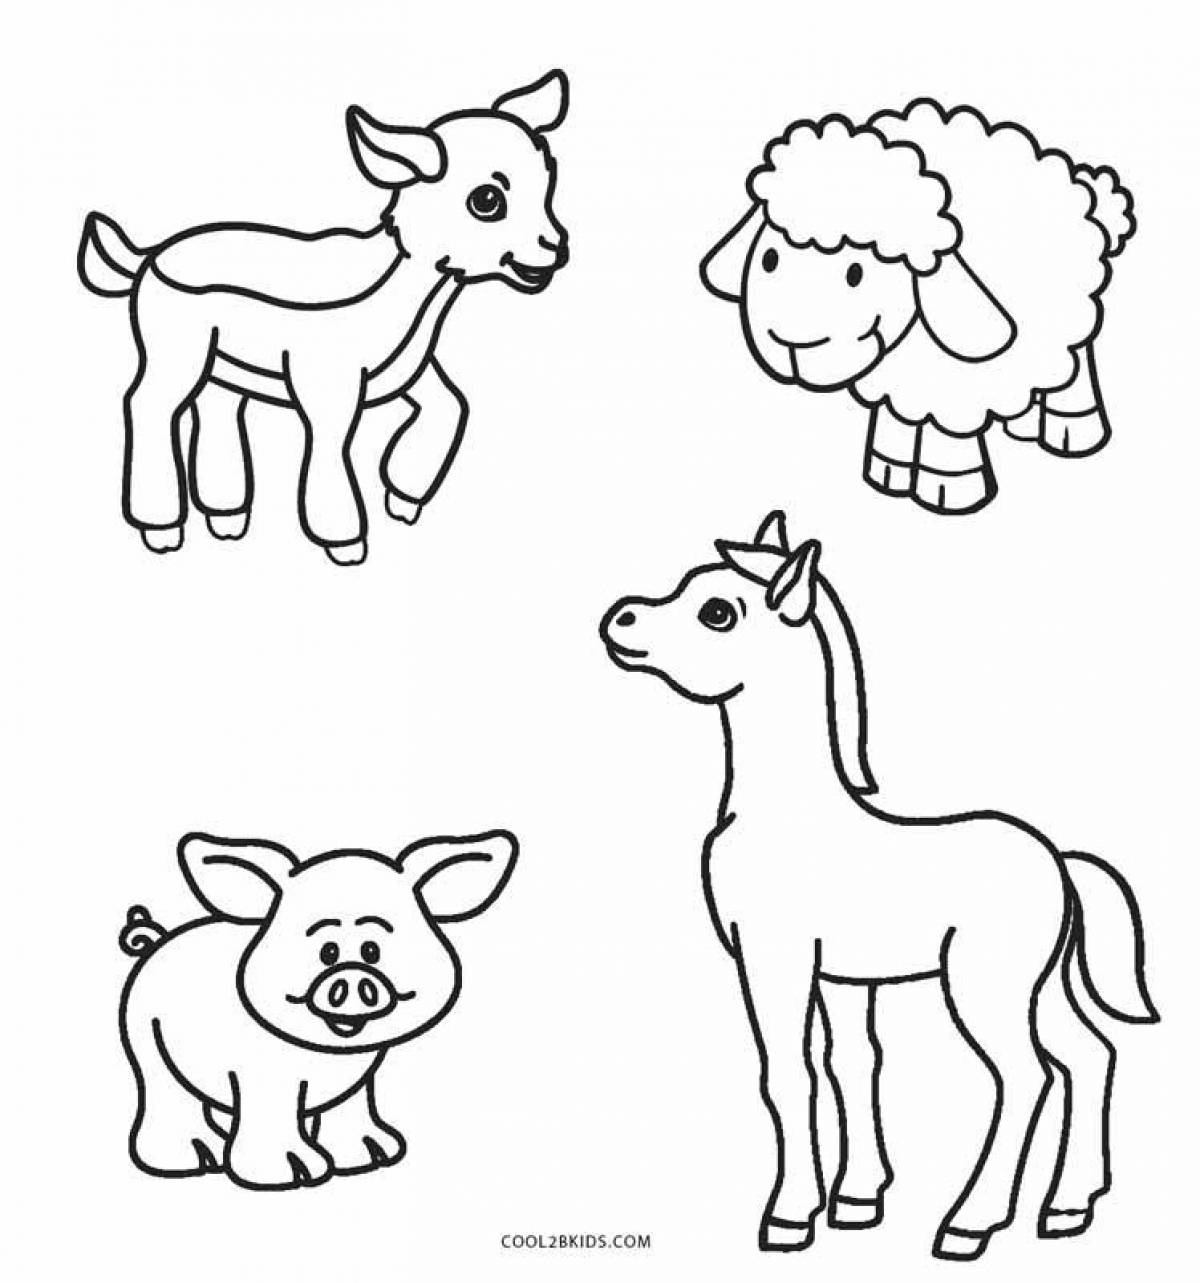 Animal coloring pages for kids